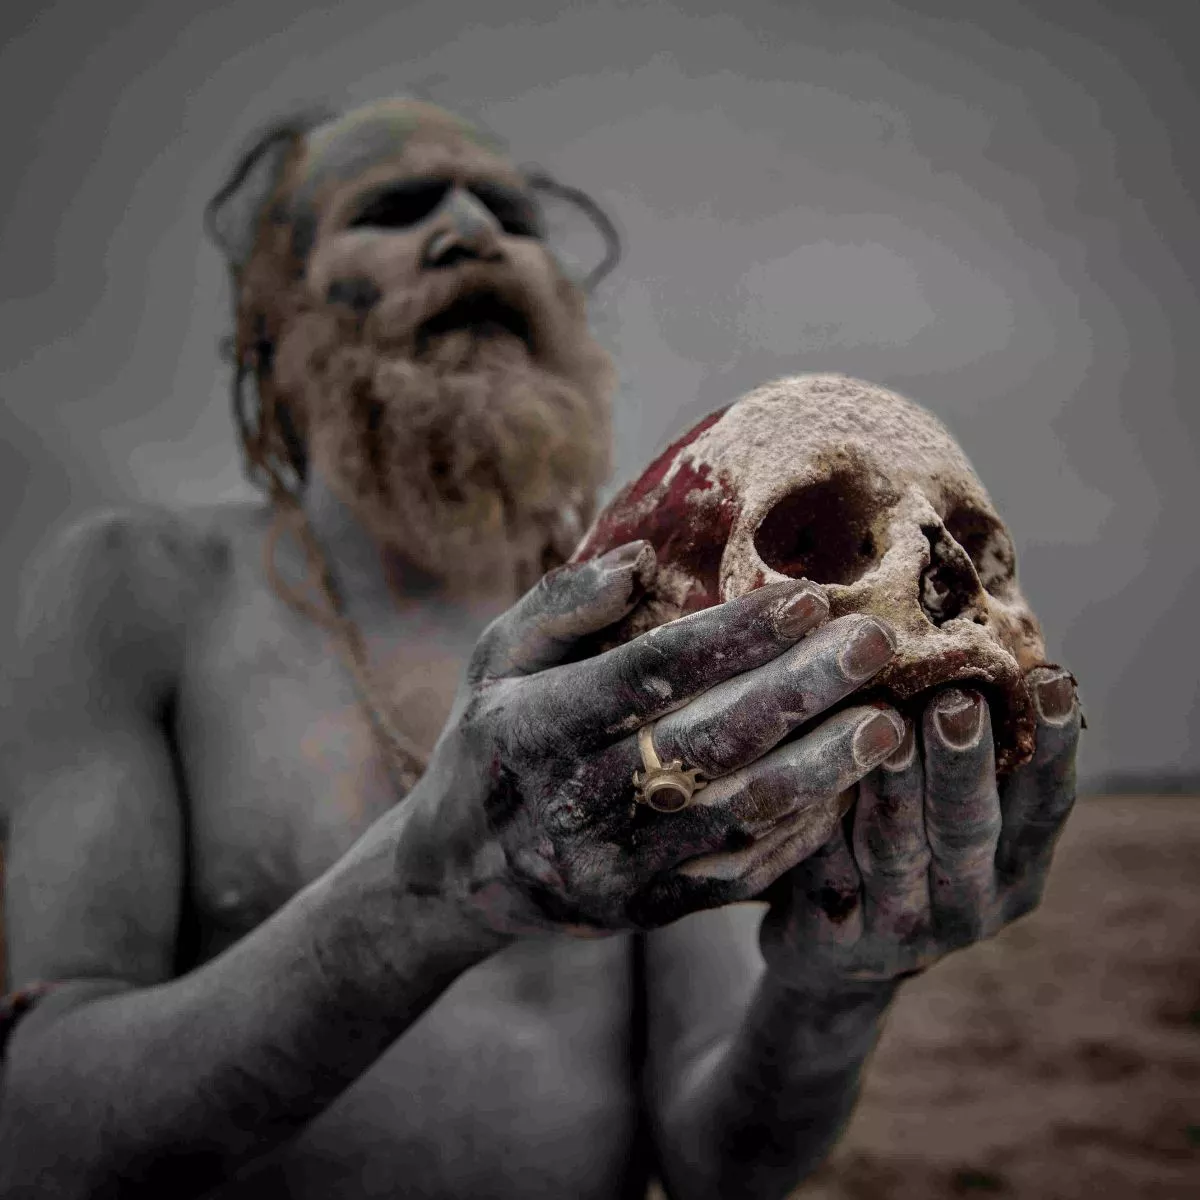 dawn purser recommends Aghori Eating Dead Body